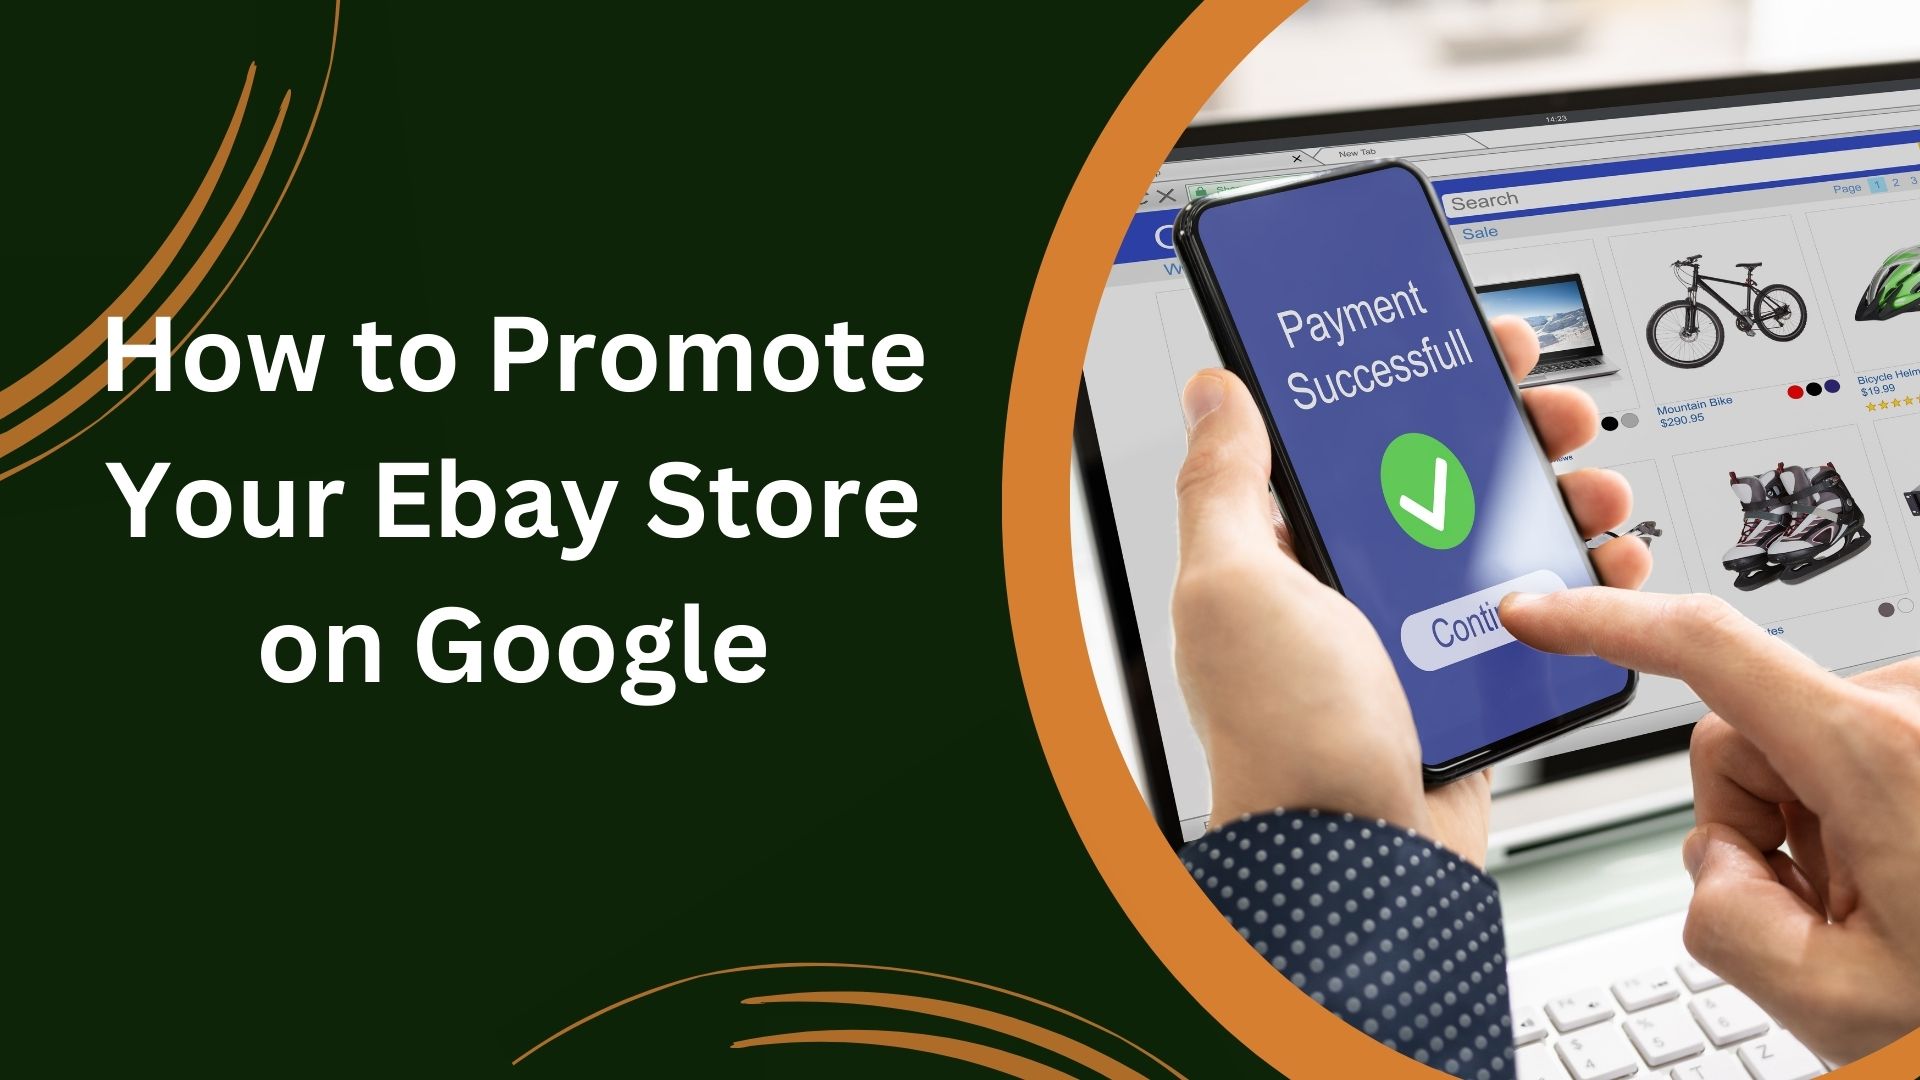 How to Promote Your Ebay Store on Google